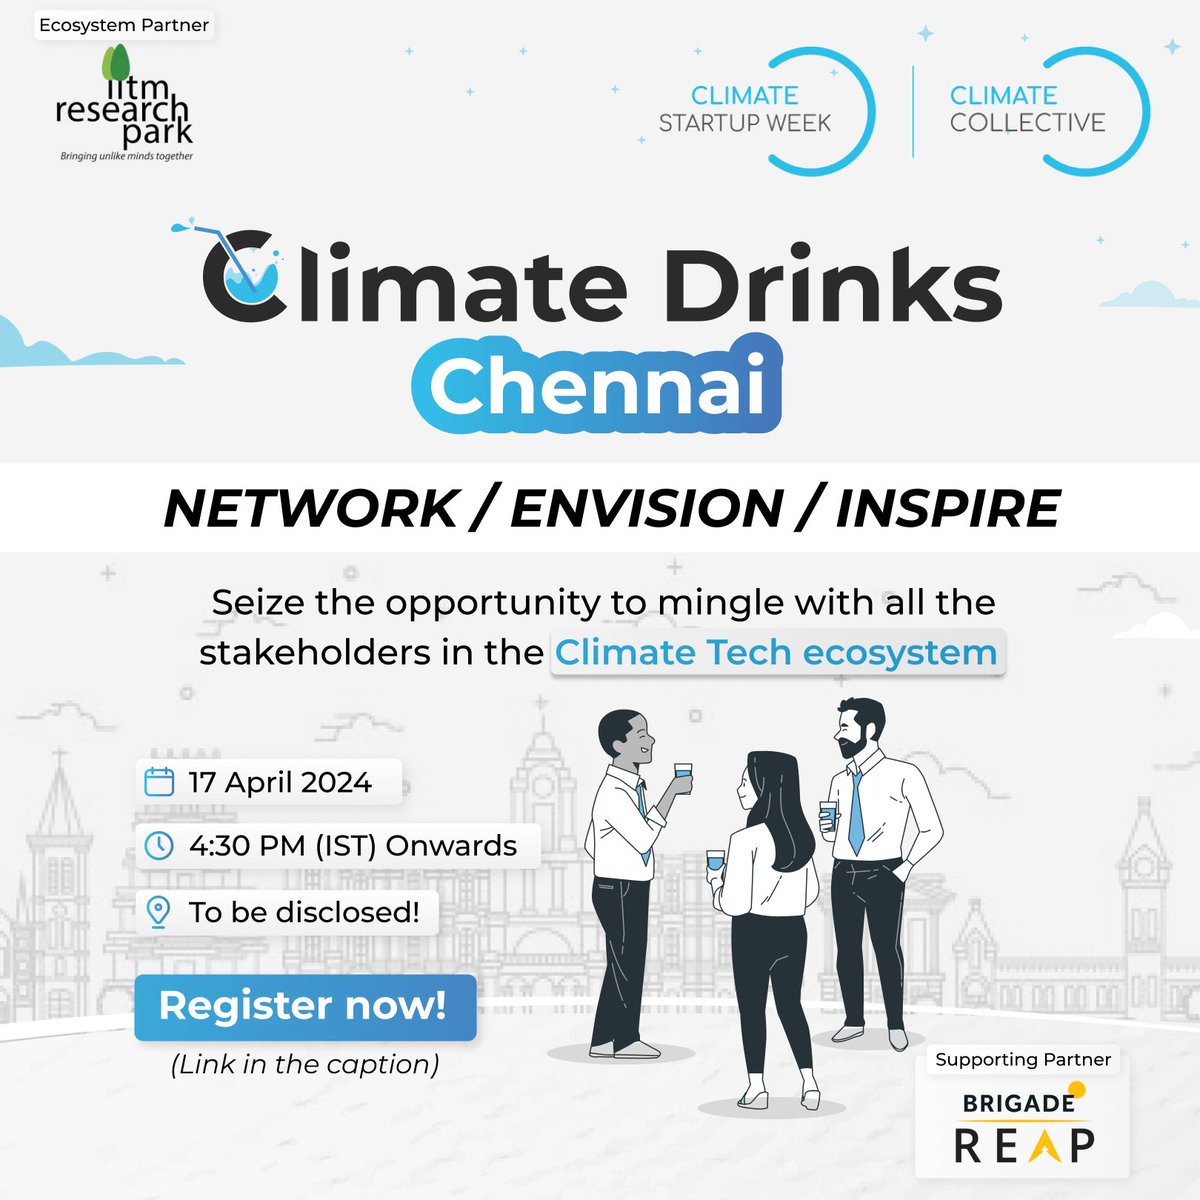 Delighted to associate with @CCollectiveNet as ecosystem partner in presenting Climate Drinks Chennai! Encouraging #startups & pioneers to leverage this exciting opportunity mingle with key stakeholders in the #climatetech space! Register Now - climatecollective.typeform.com/to/zBWQKrWC